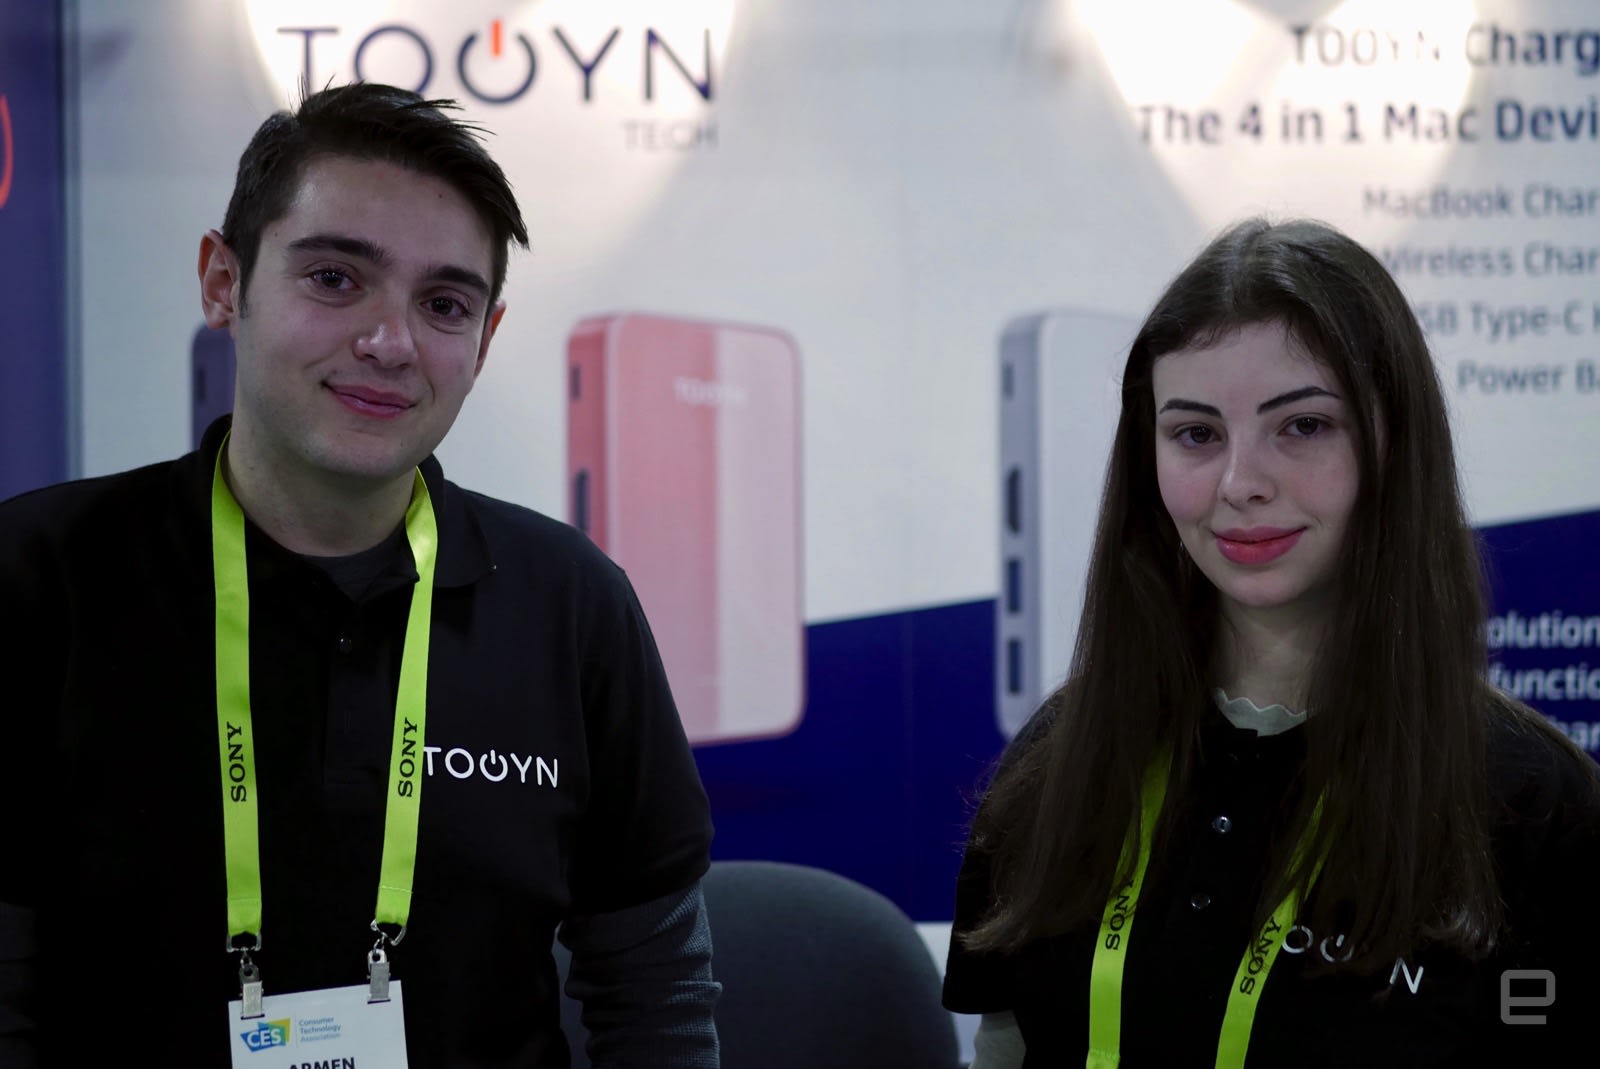 Tooyn at CES 2019